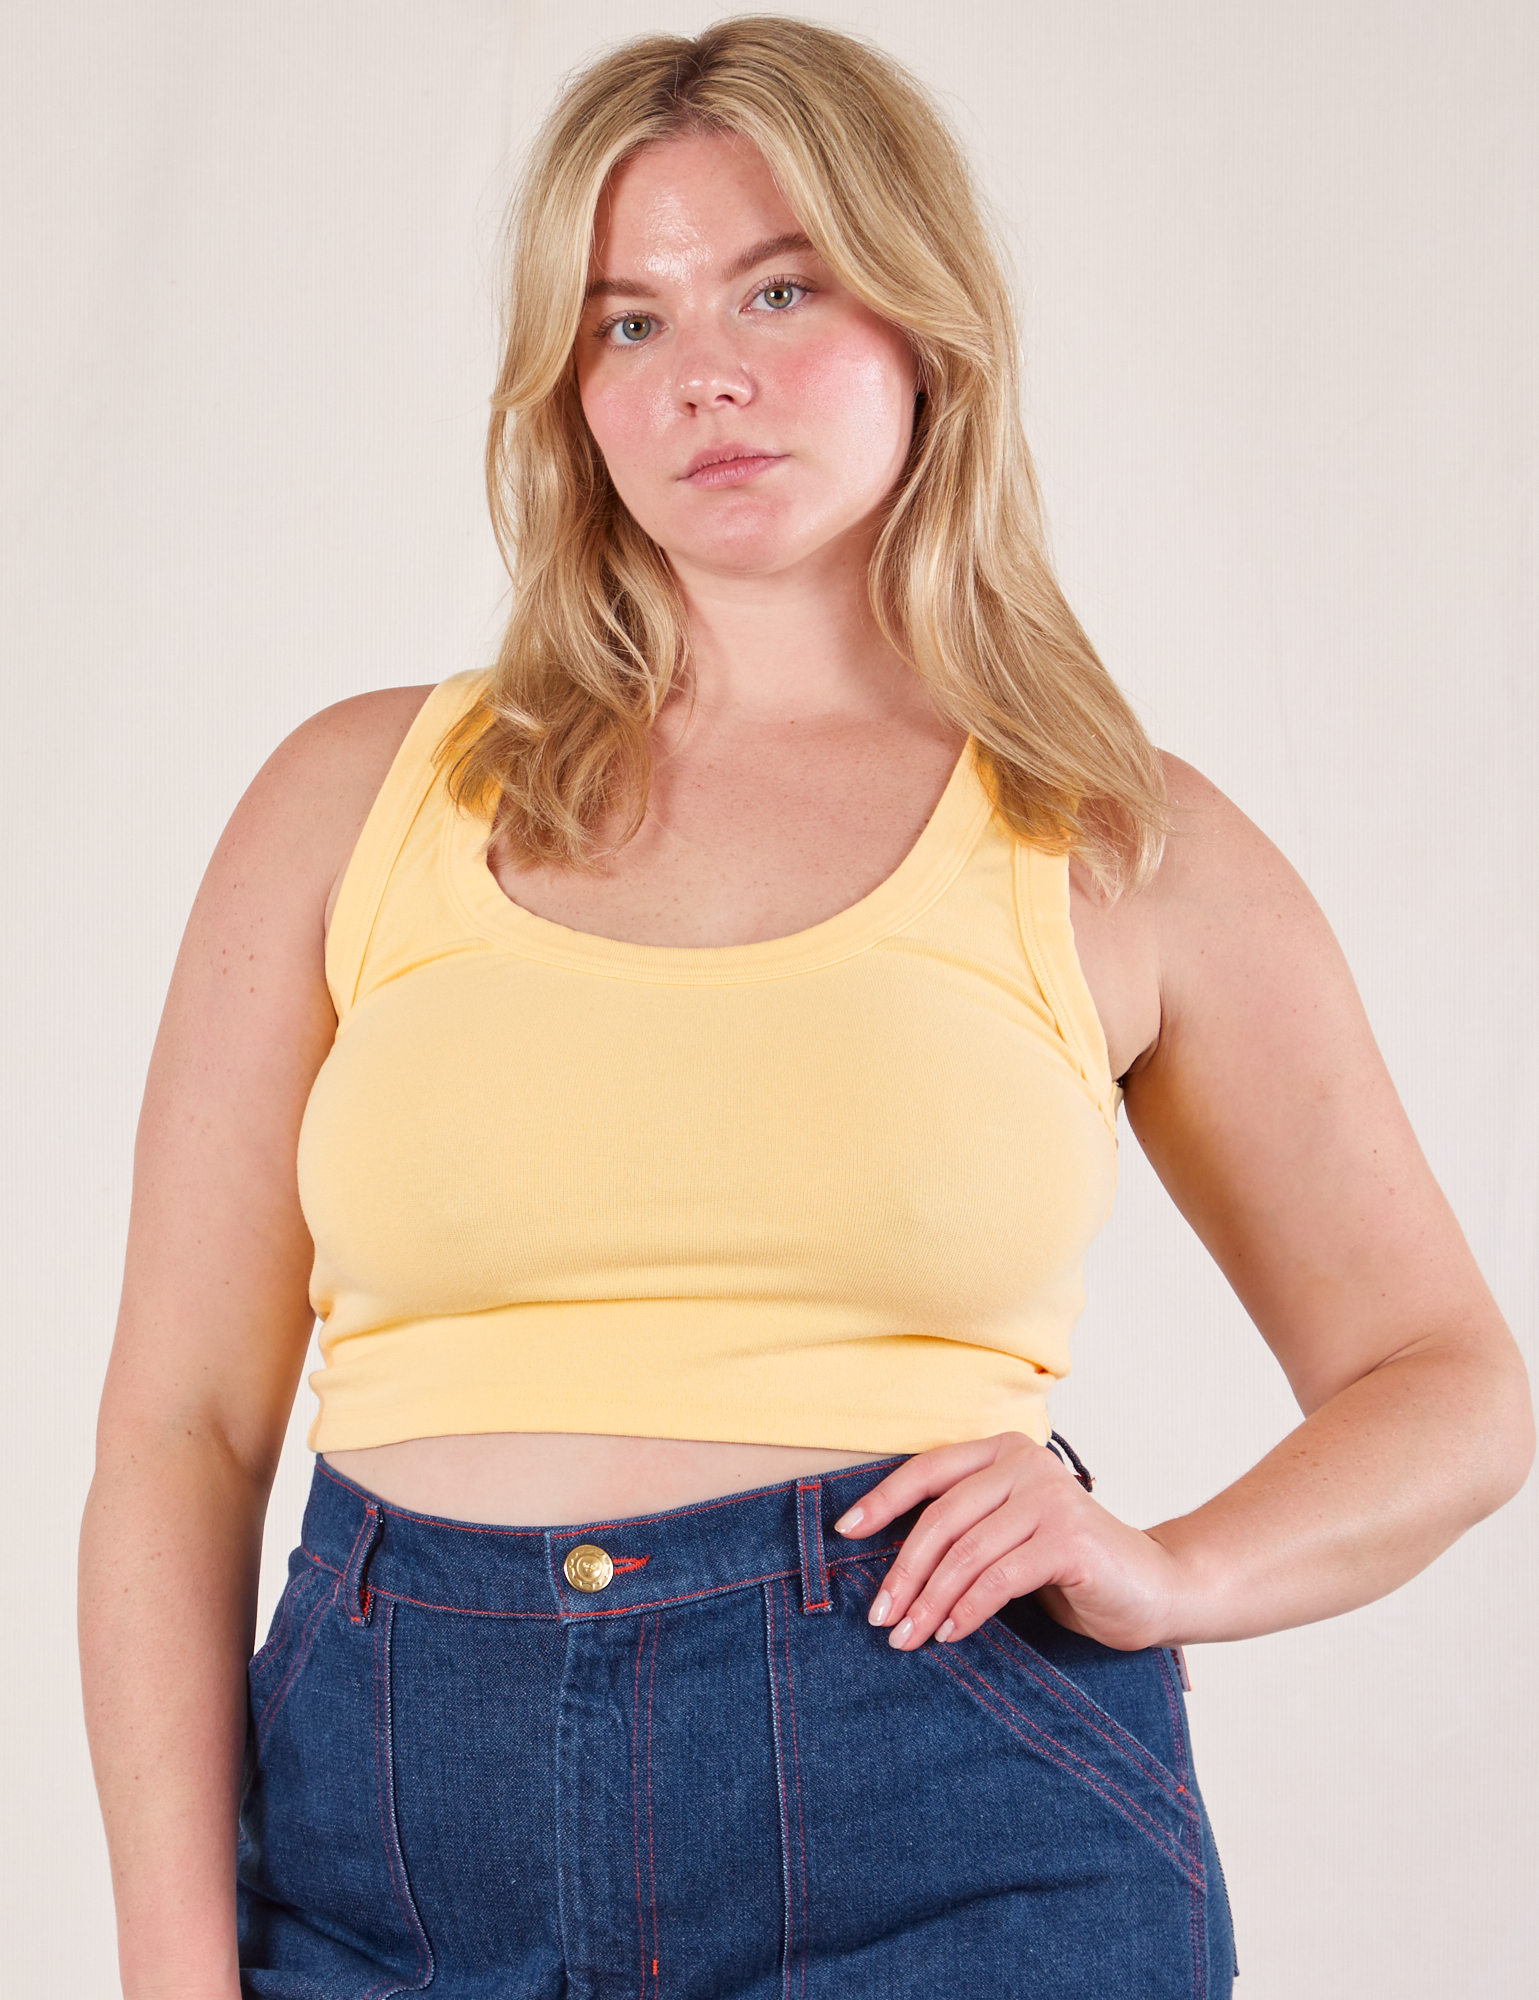 Lish is wearing Cropped Tank Top in Butter Yellow